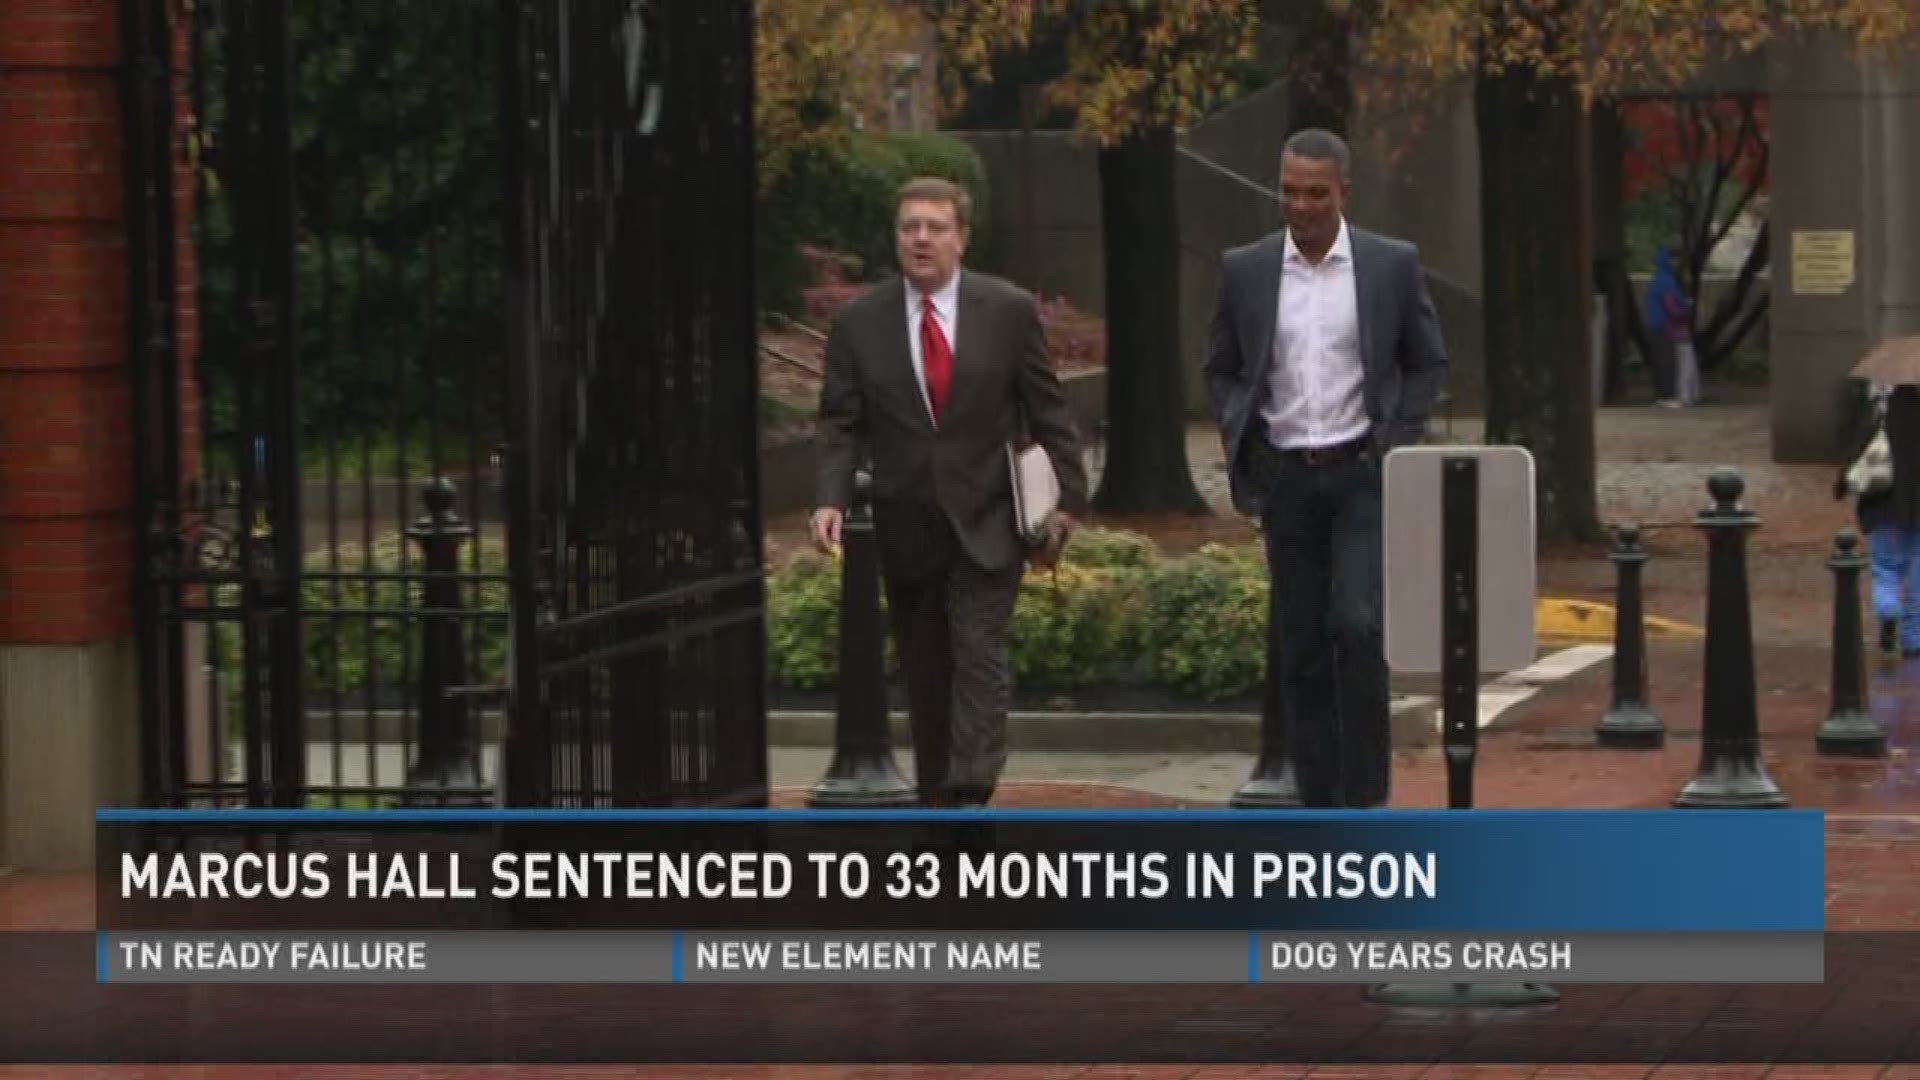 Marcus Hall was sentenced to 33 months in prison.